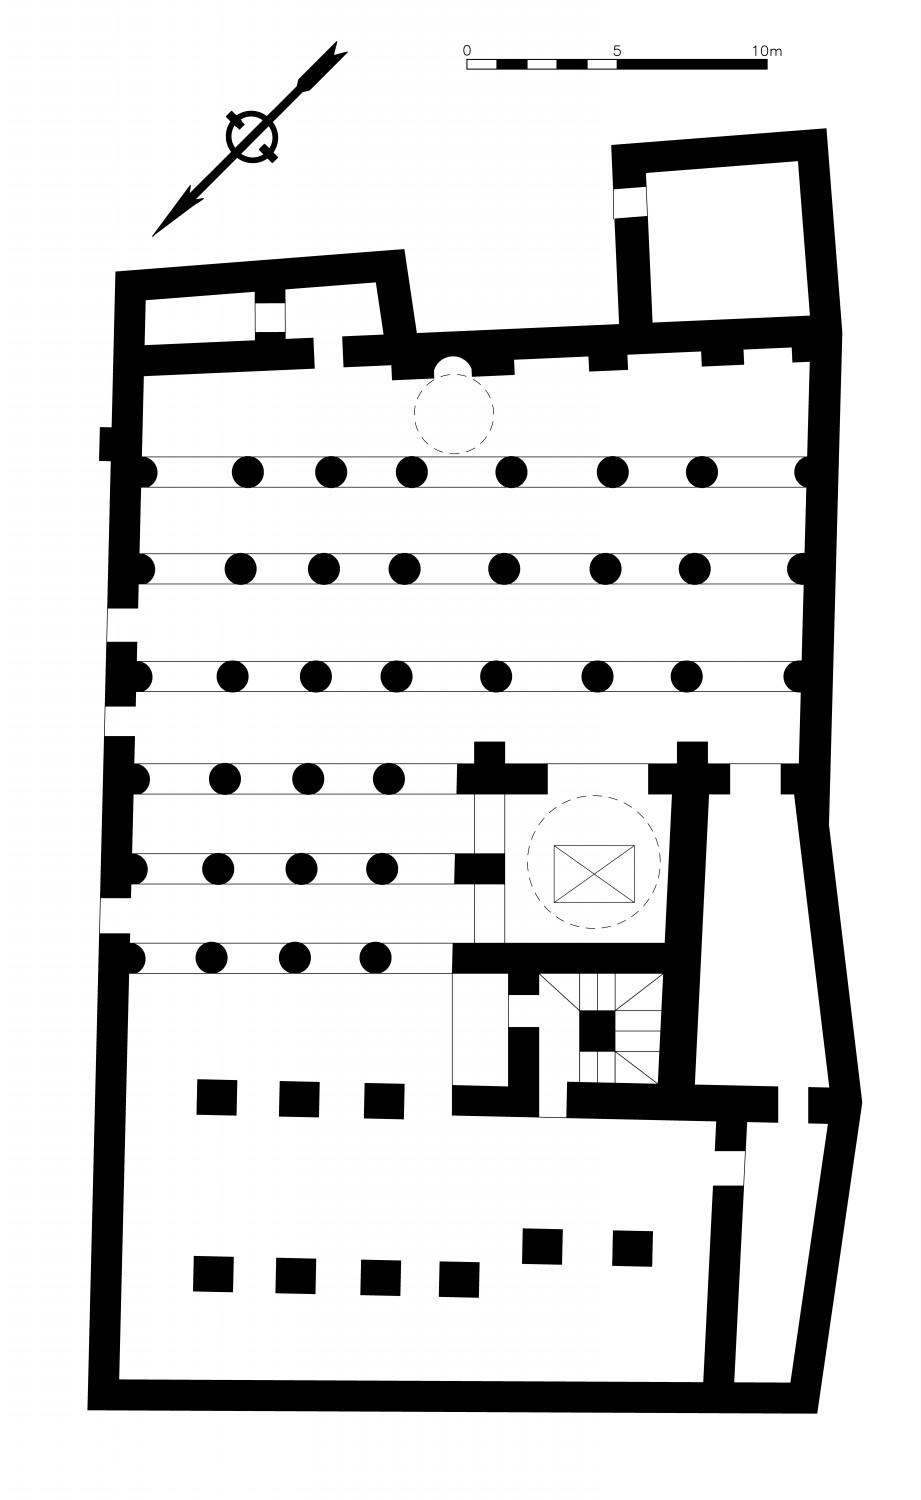 Plan of the mosque, Based on Bourouiba (1986)